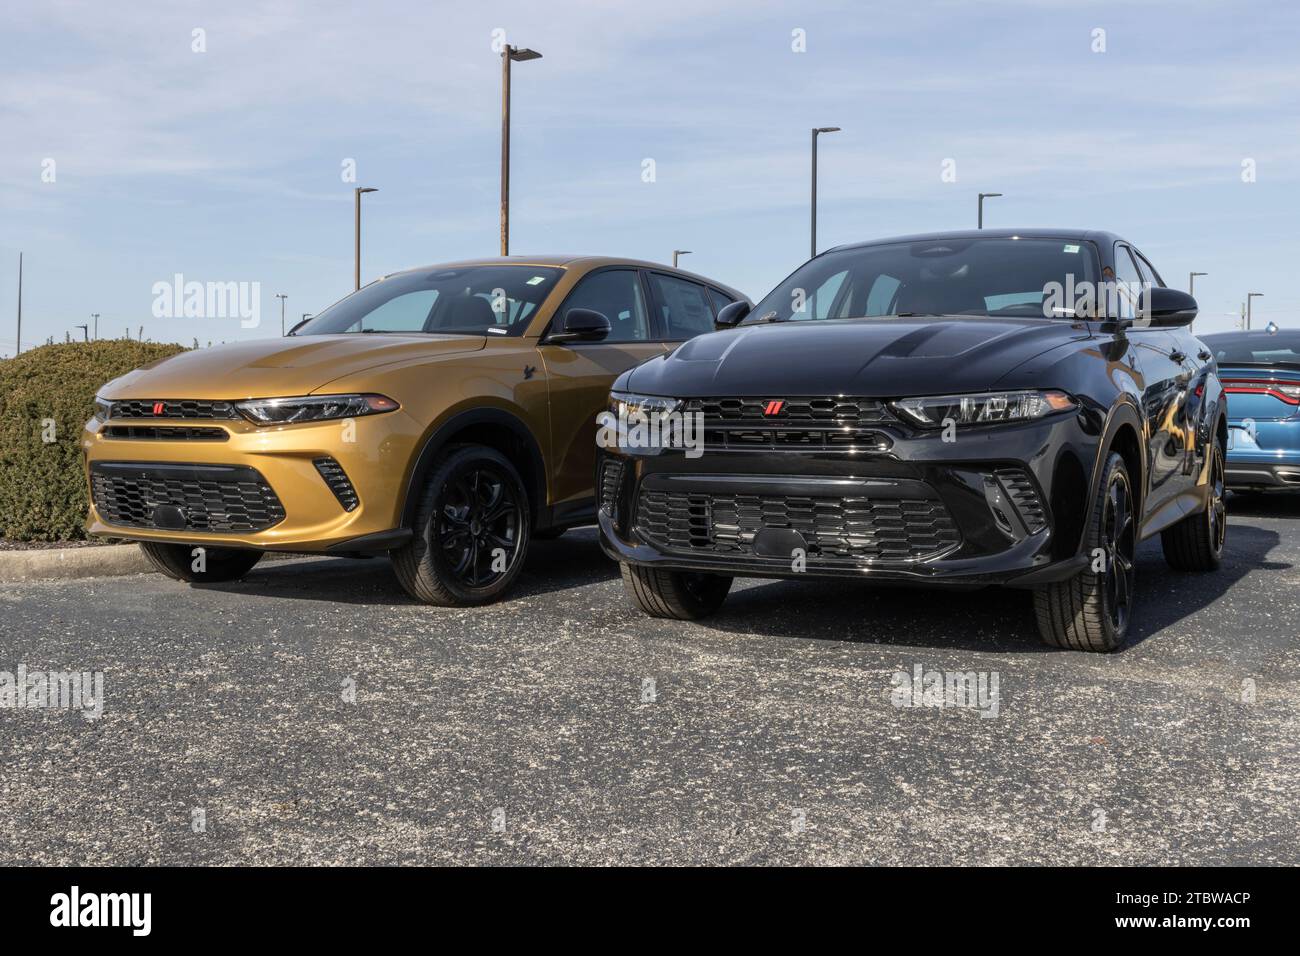 Indianapolis - December 7, 2023: Dodge Hornet display at a dealership. Dodge offers the Hornet in R/T, GT, and Plus models. Stock Photo